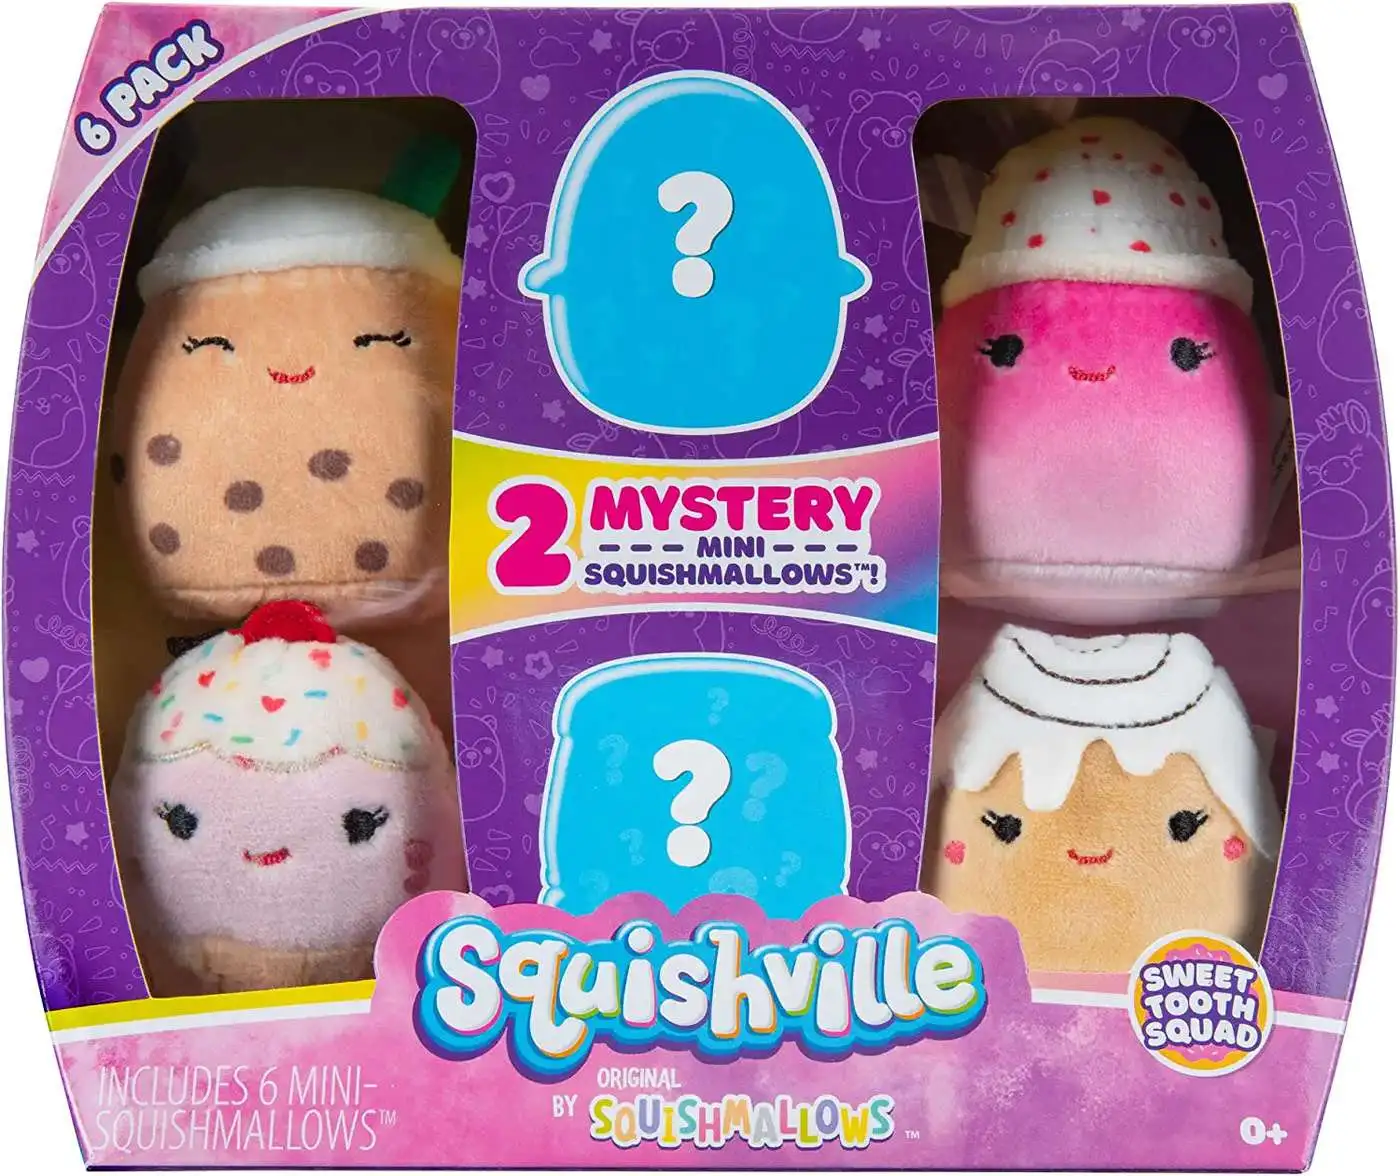 Squishville by Squishmallows Vacation Squad 2 inch Plush Toy - 10 Pack